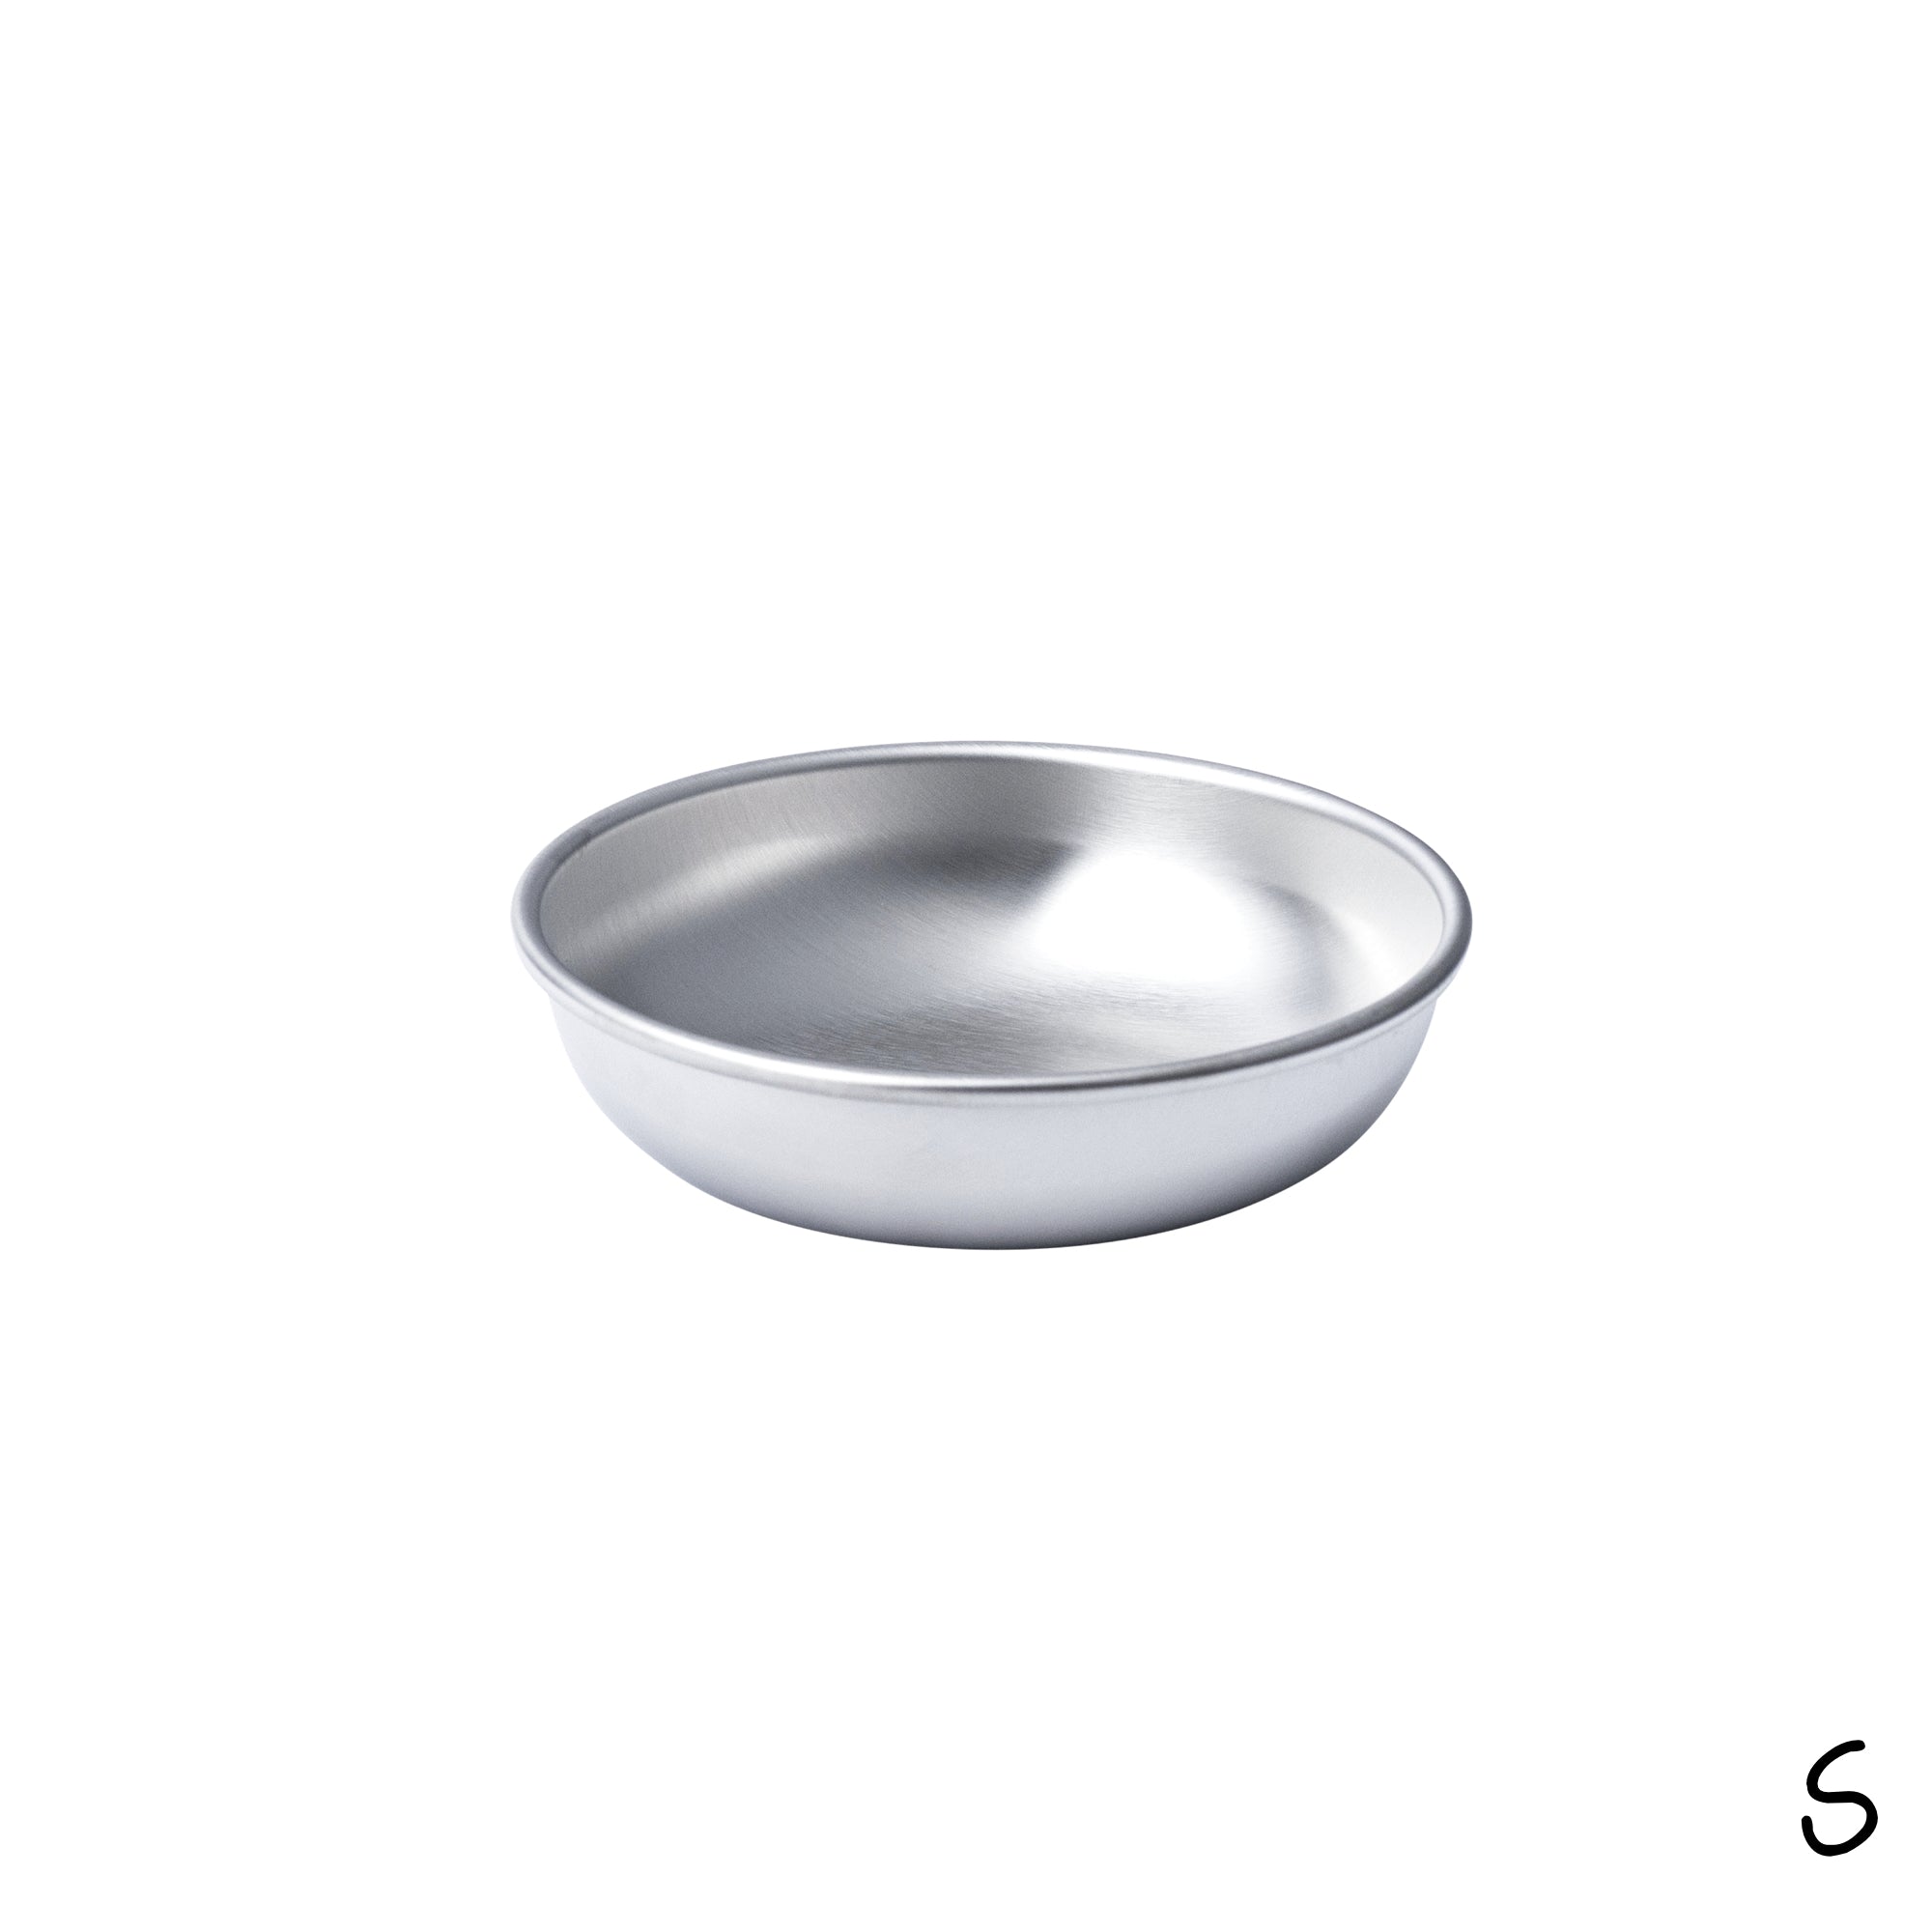 3 Gallons Extra Large Dog Water Bowl, Durable Stainless Steel Dog Bowl,  Safe High Capacity Water and Food Bowl for Large, X-Large Breed Dogs Indoor